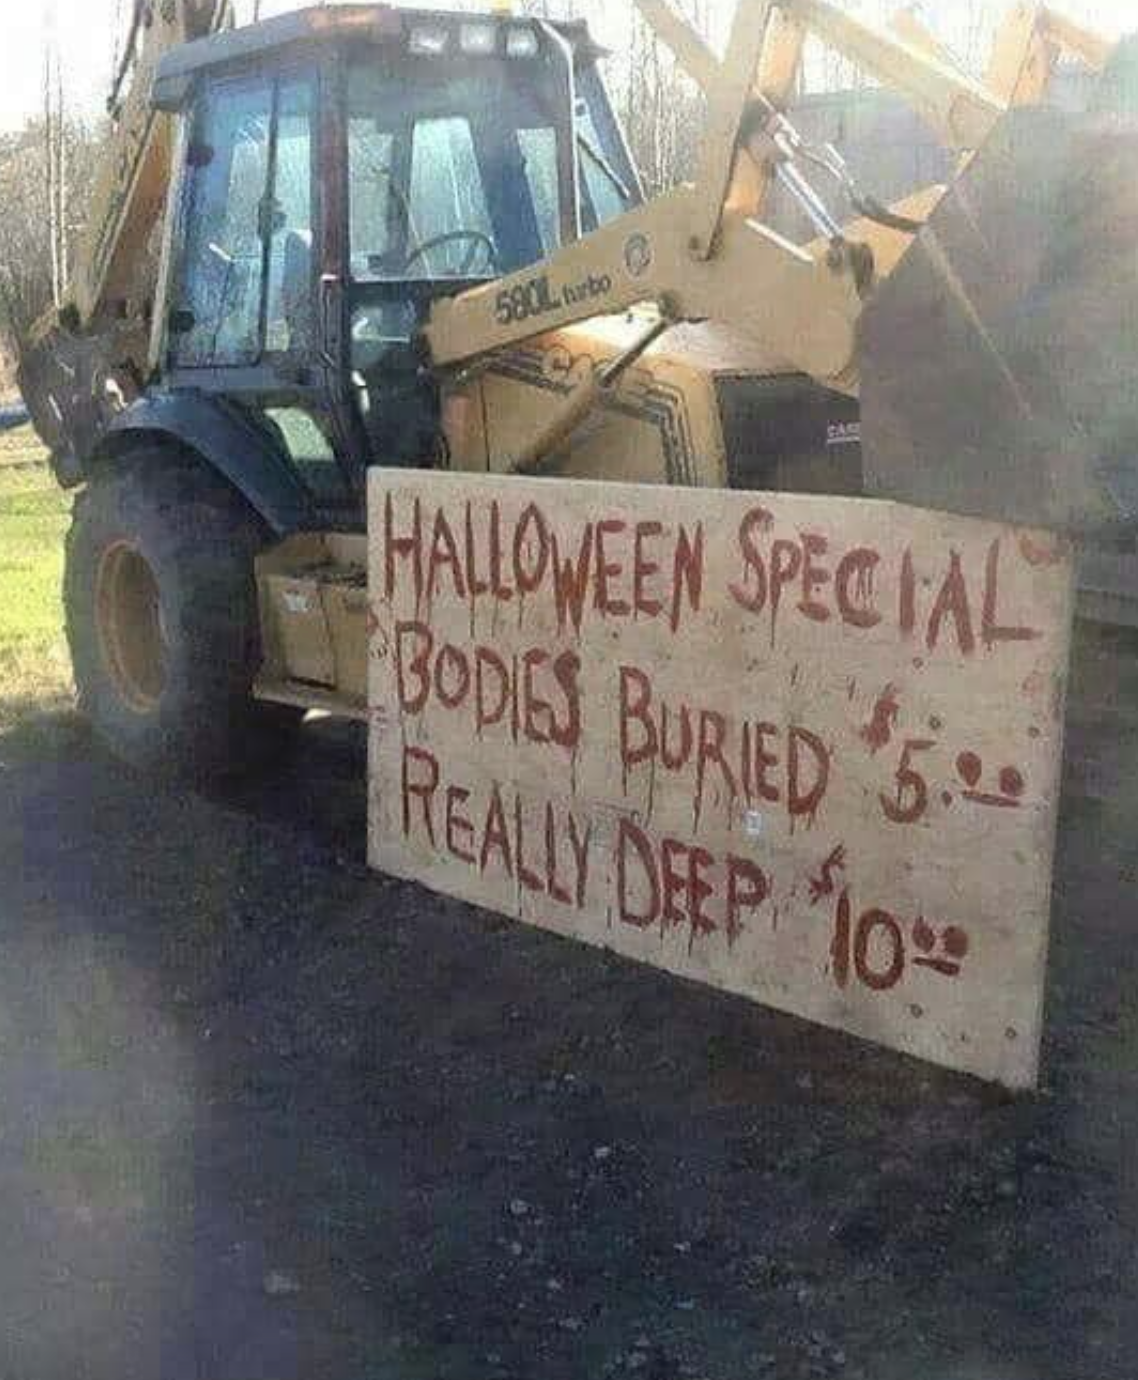 halloween special, bodies buried $5, really deep $10 next to a tractor shovel